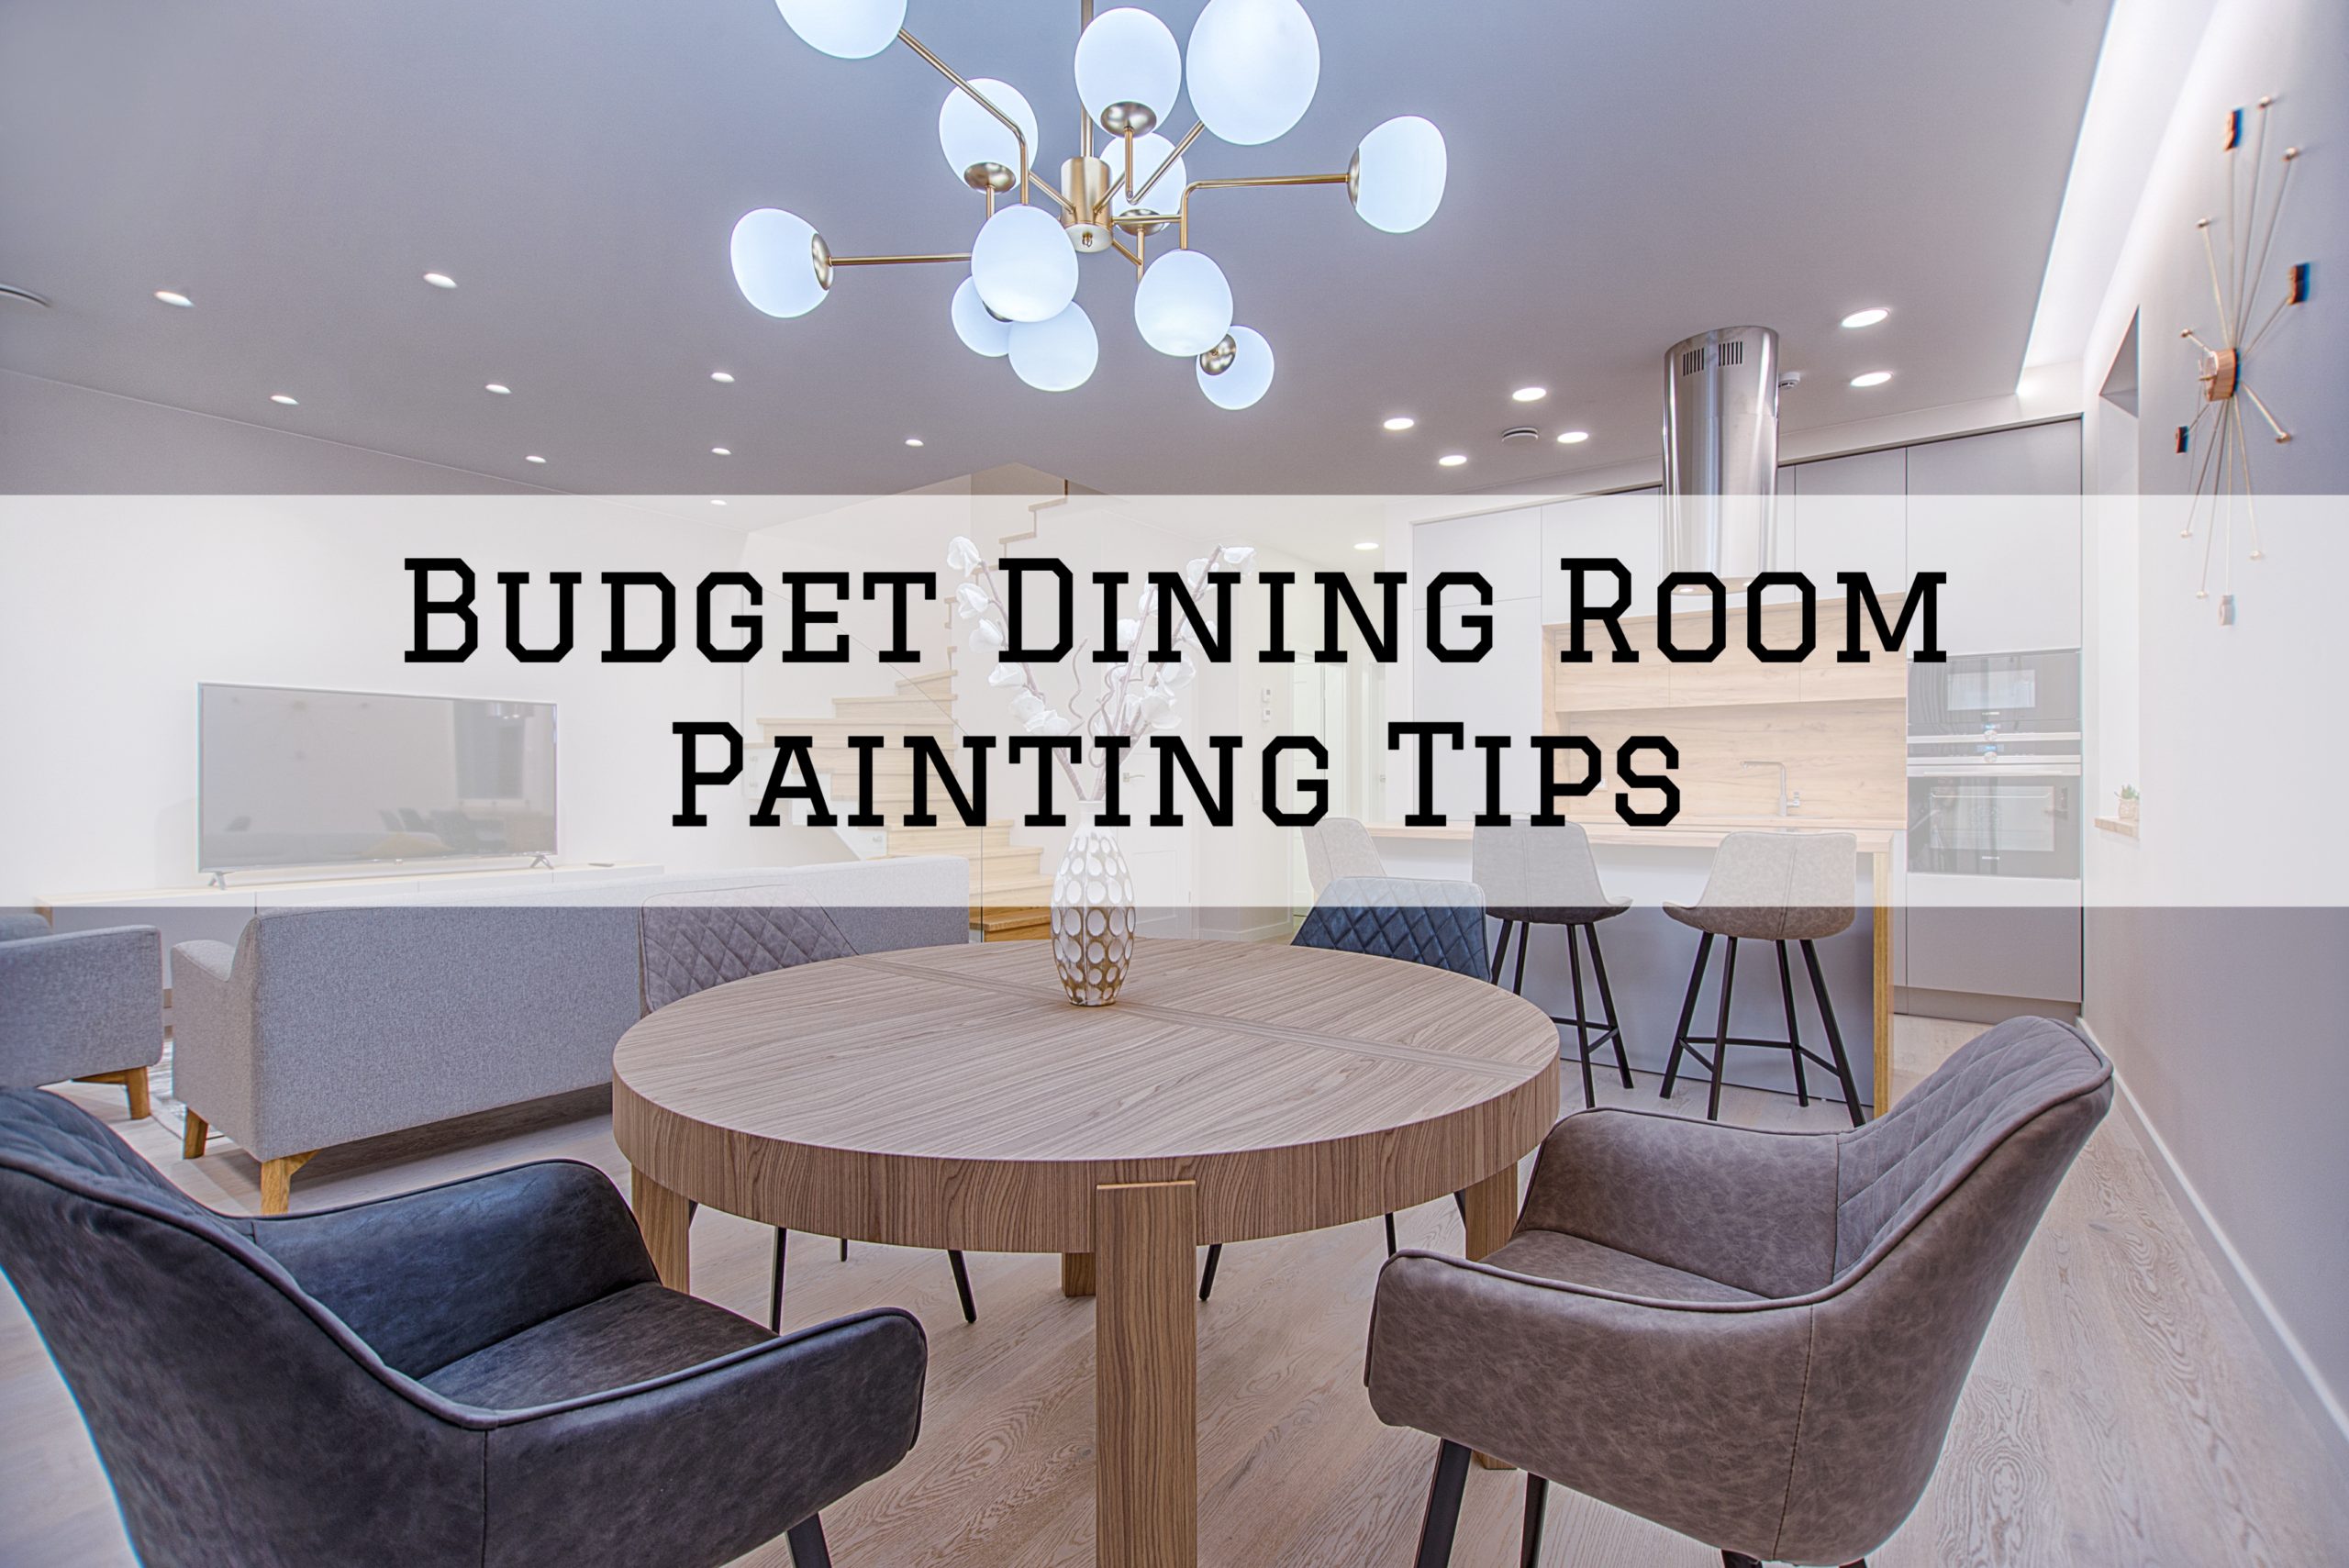 2022-09-16 Left Moon Painting Kennett Square PA Budget Dining Room Painting Tips